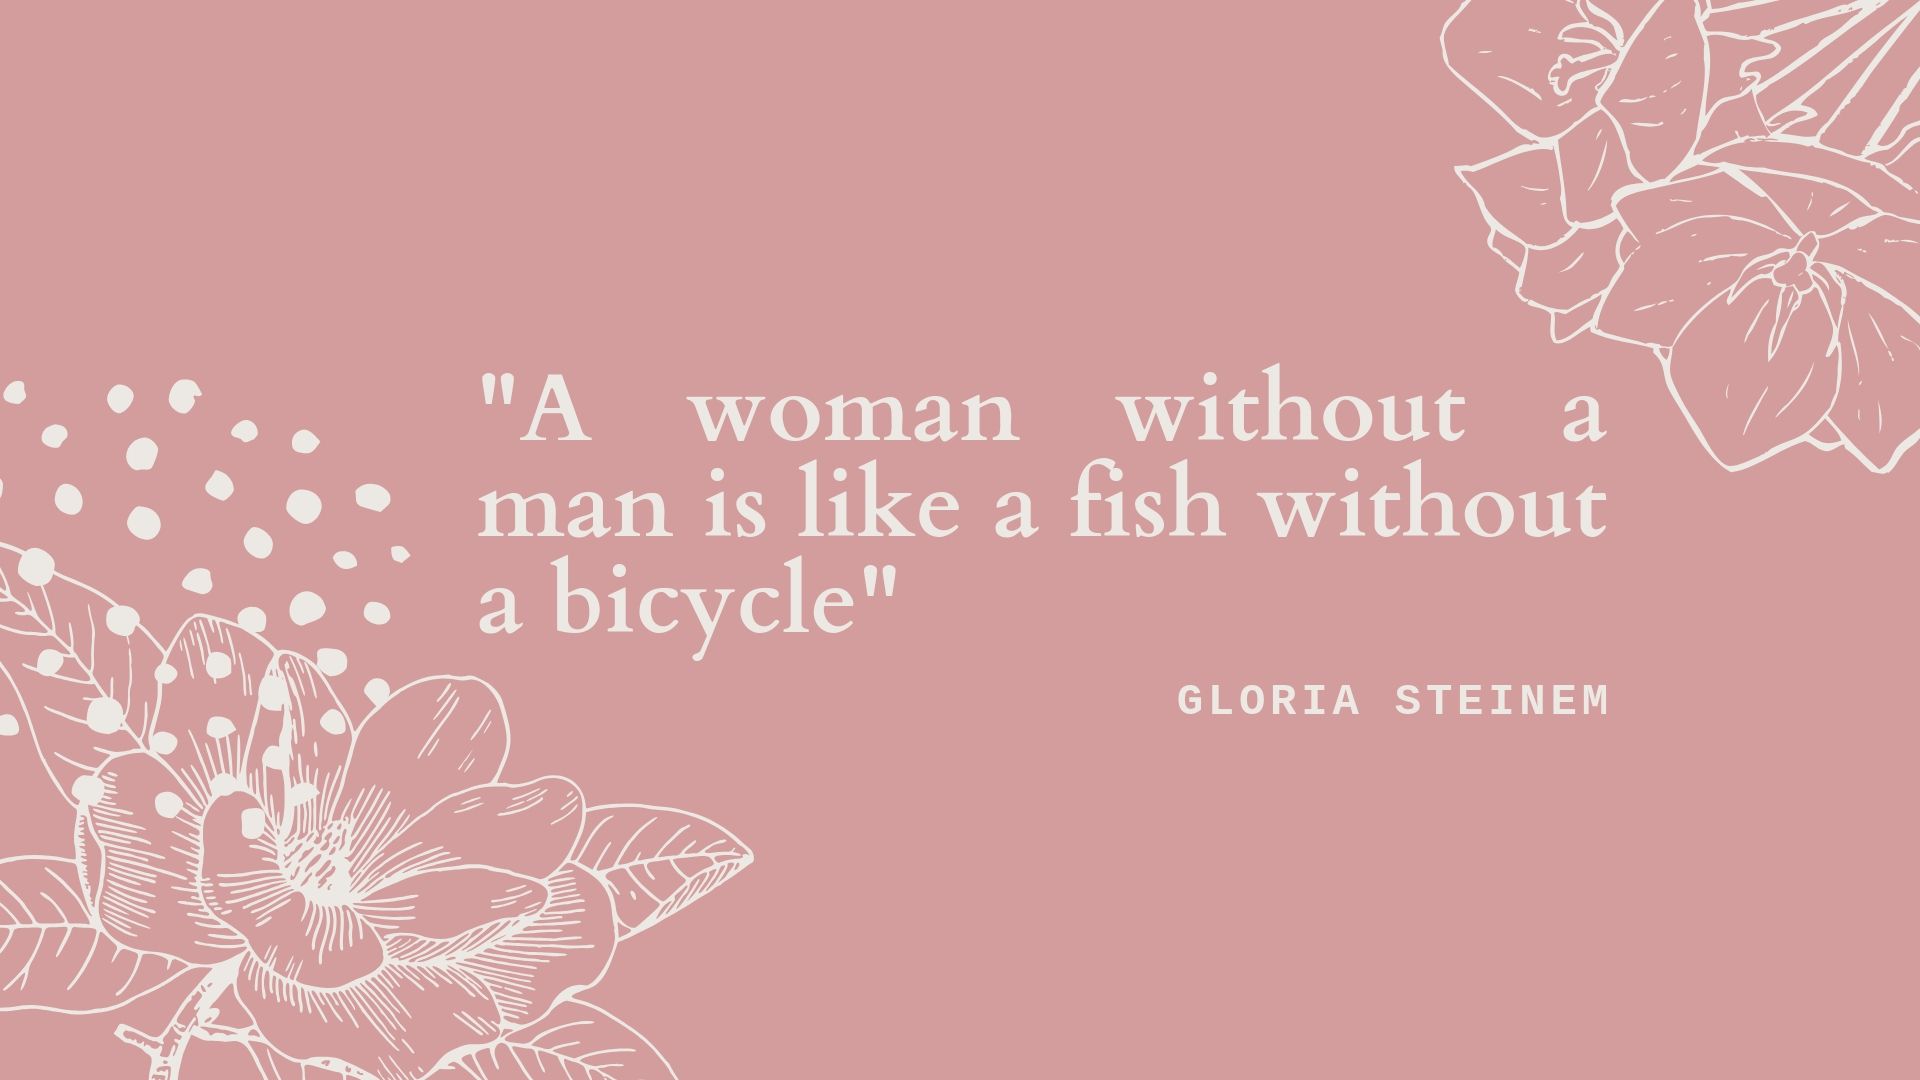 Funny Quotes By Famous Women - Elle Muse